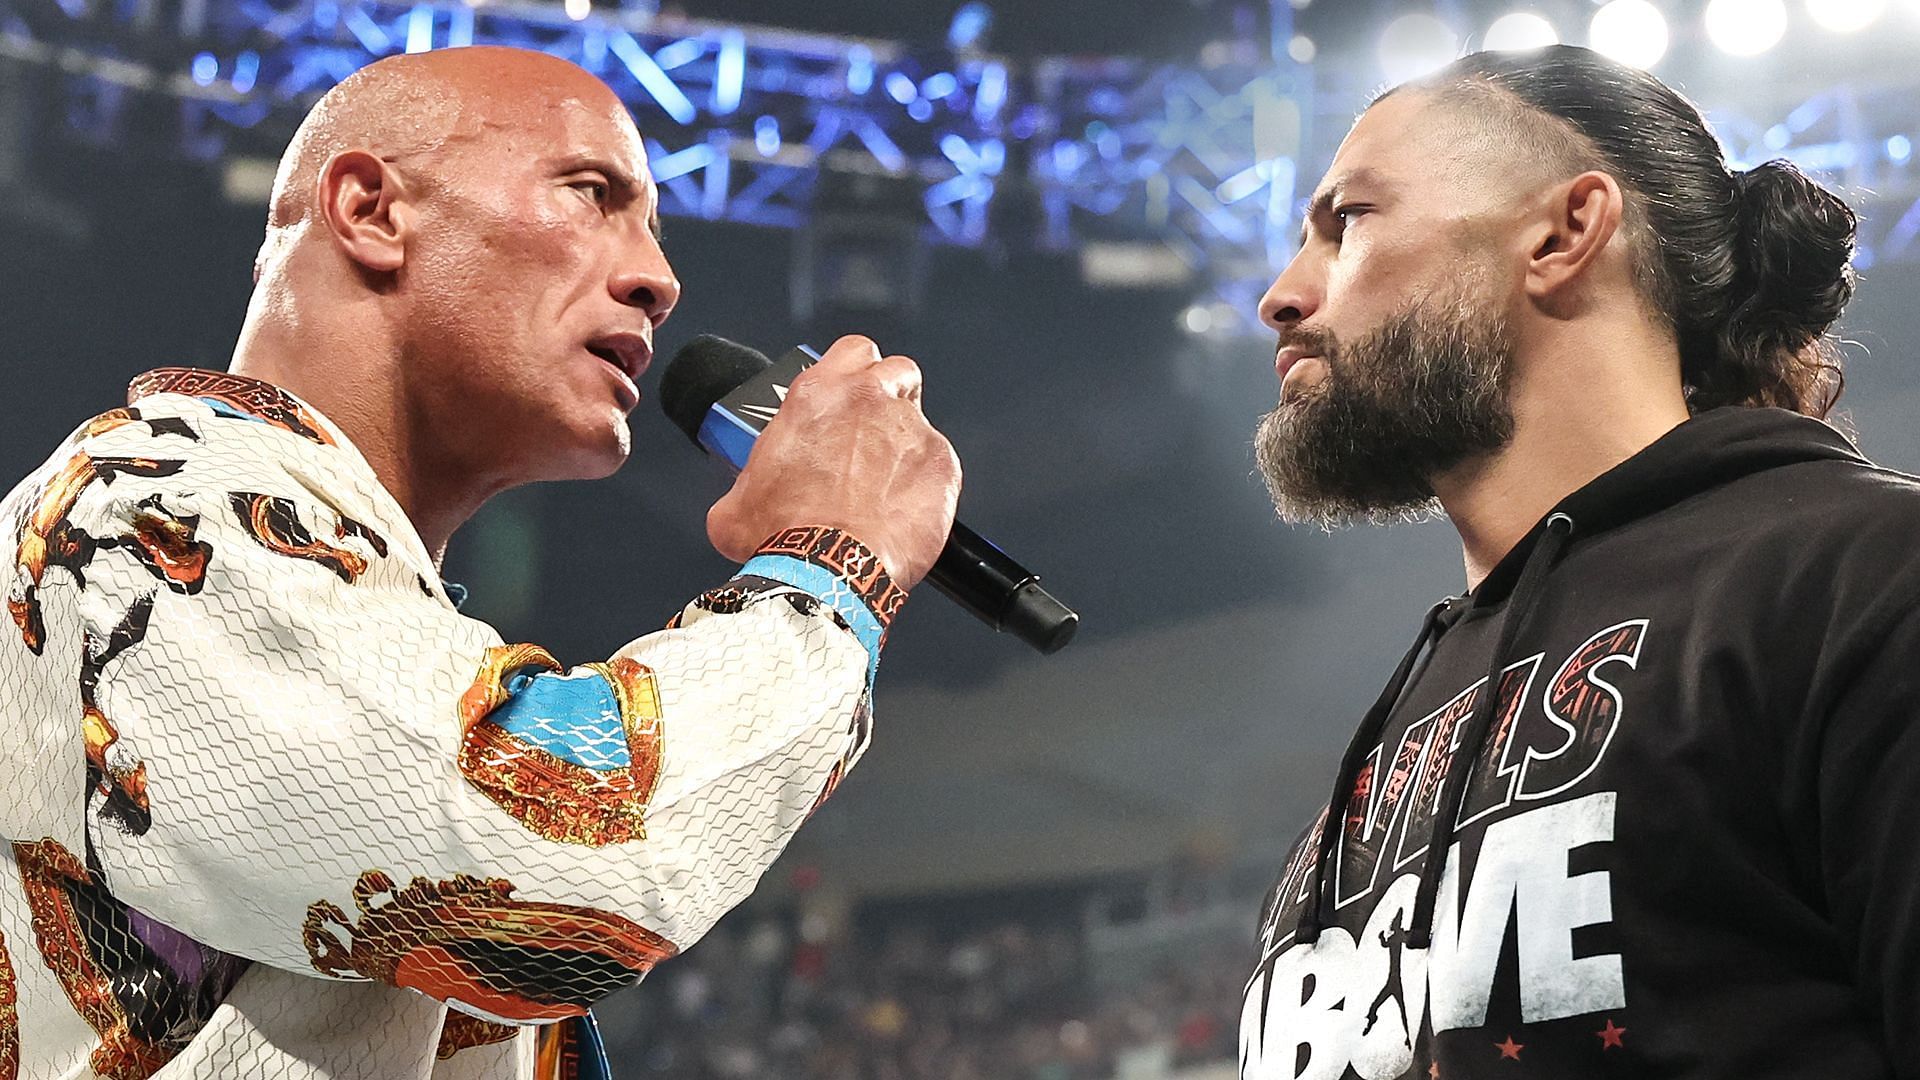 The Rock has a new nickname ahead of WrestleMania